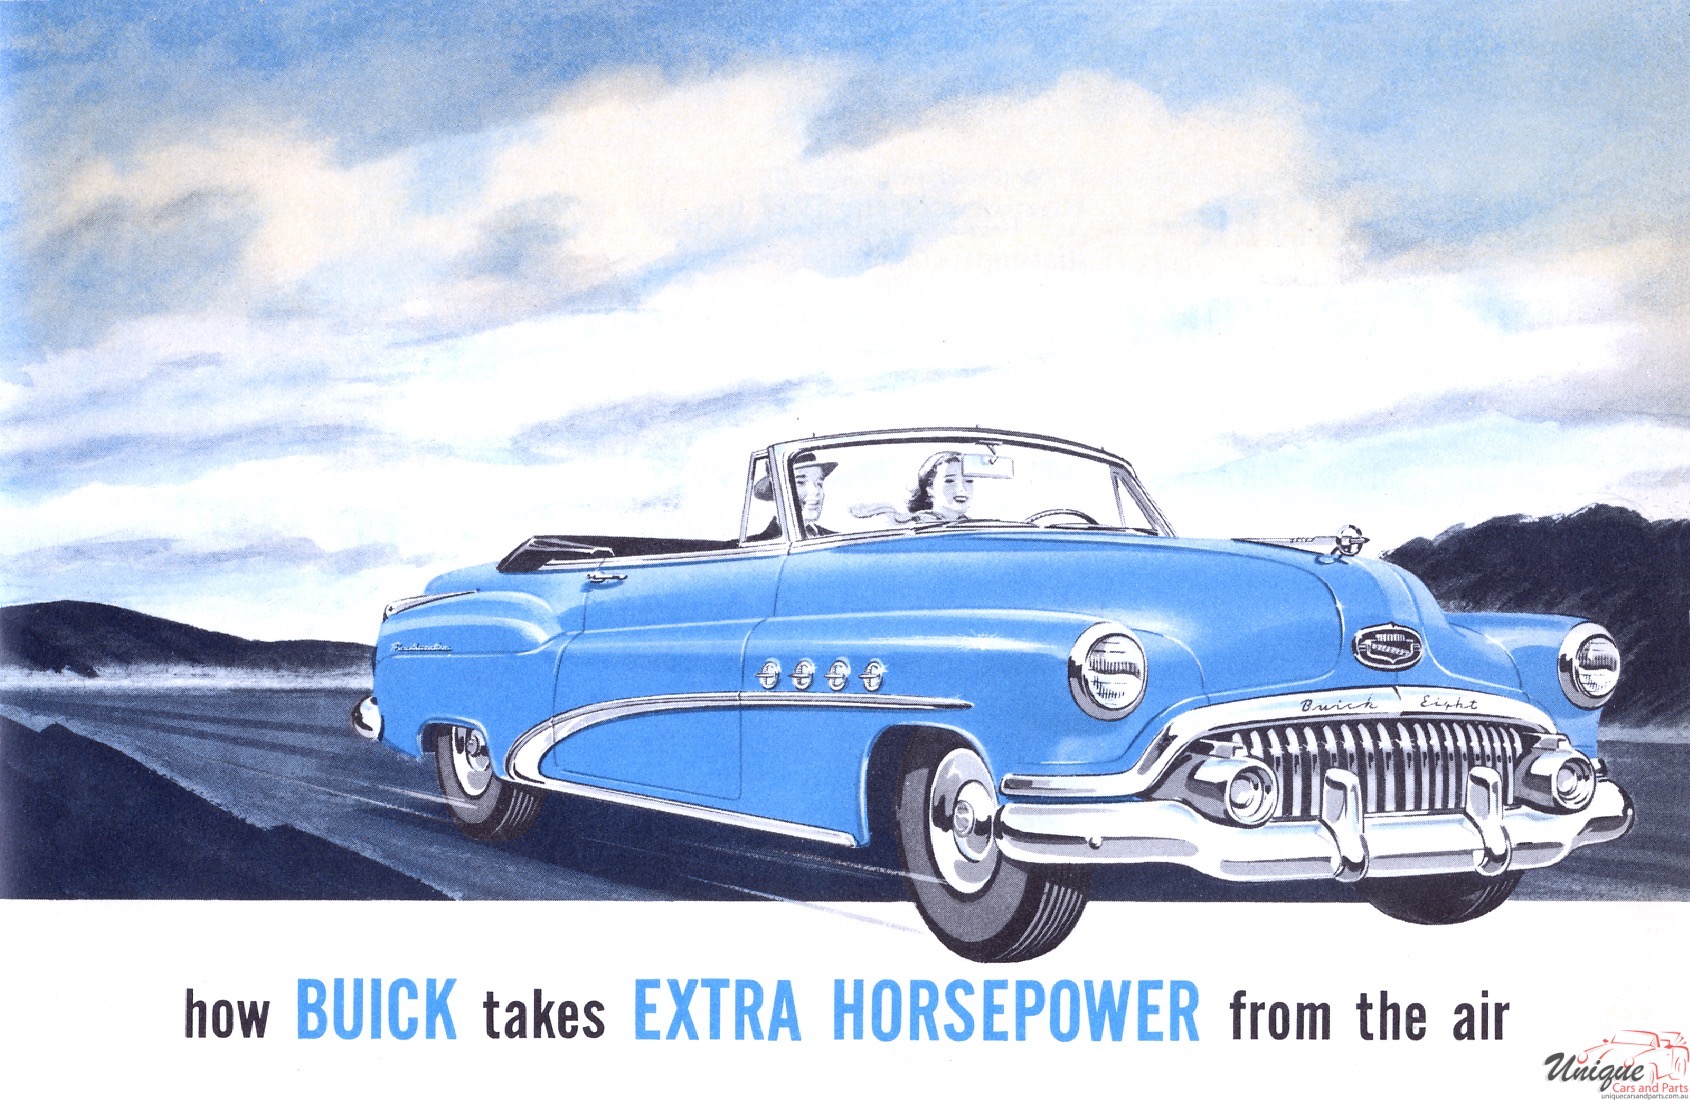 1952 Buick Airpower Brochure